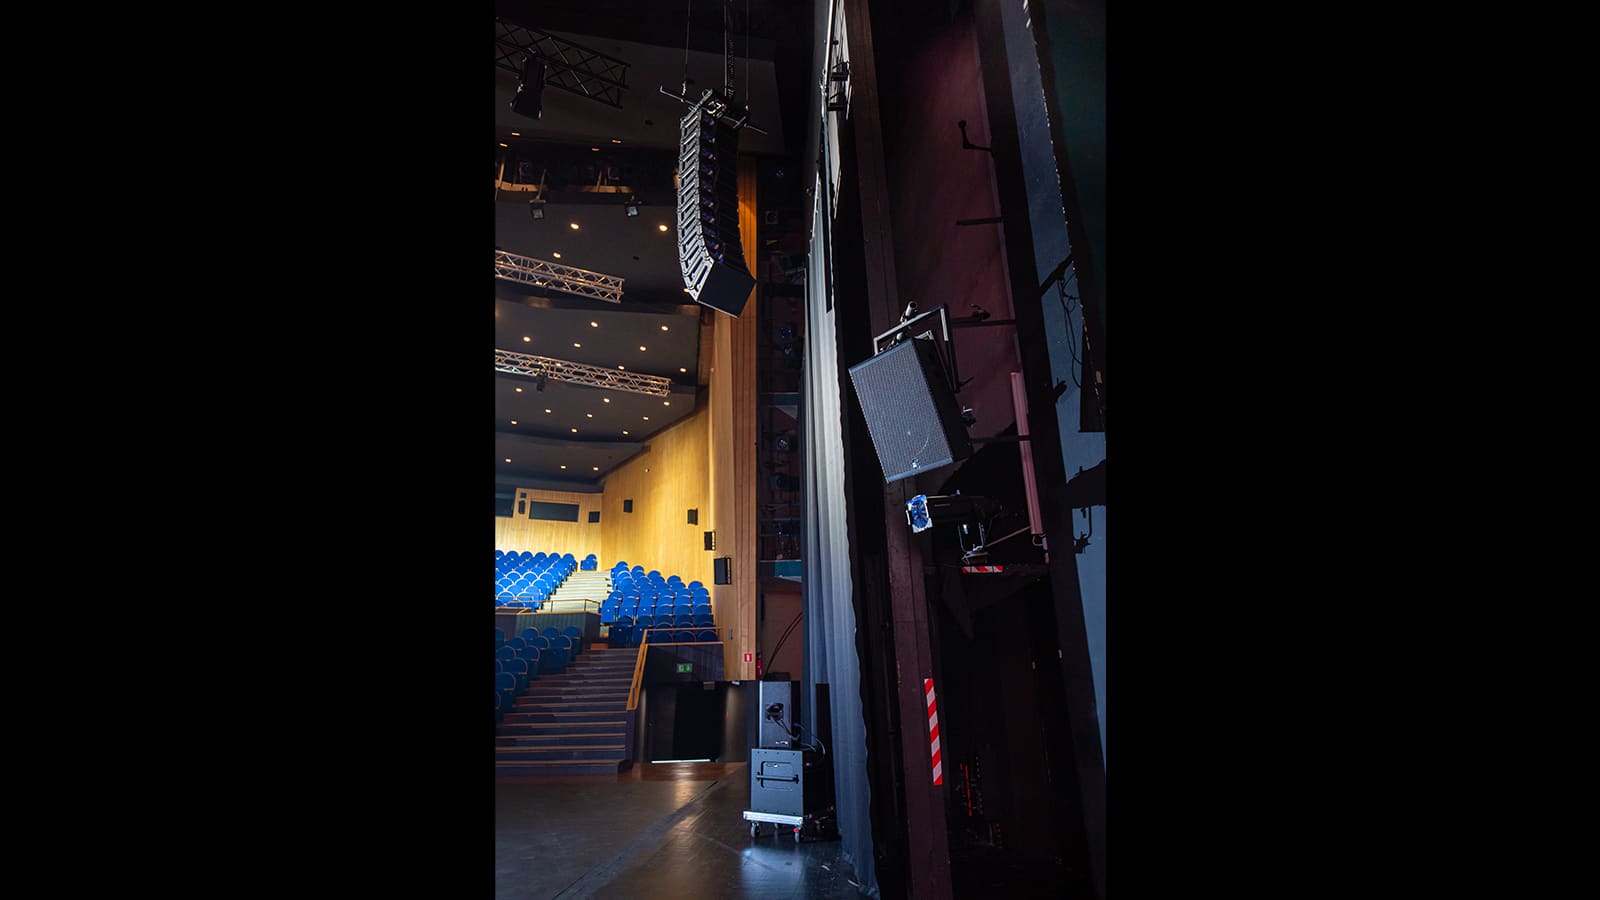 Meyer Sound Upgrade Brings Transparency, Power, and Flexibility to Prestigious Polish Theater